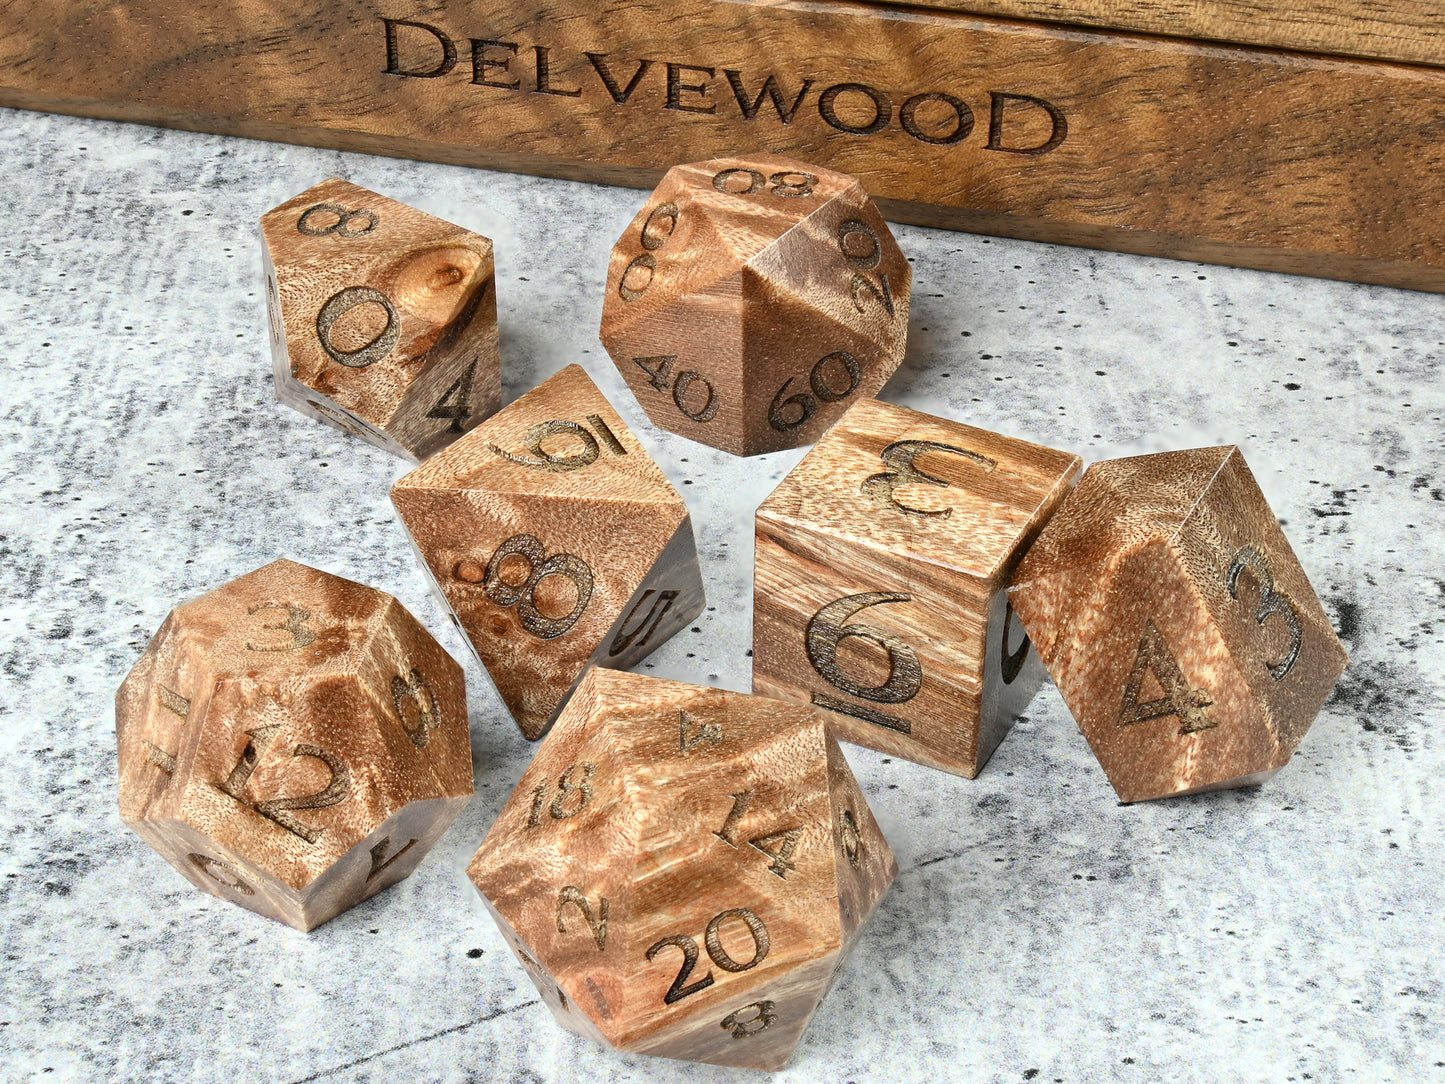 Maple Burl wood dice set for dnd rpg tabletop gaming in front of Delvewood delver's kit dice box.